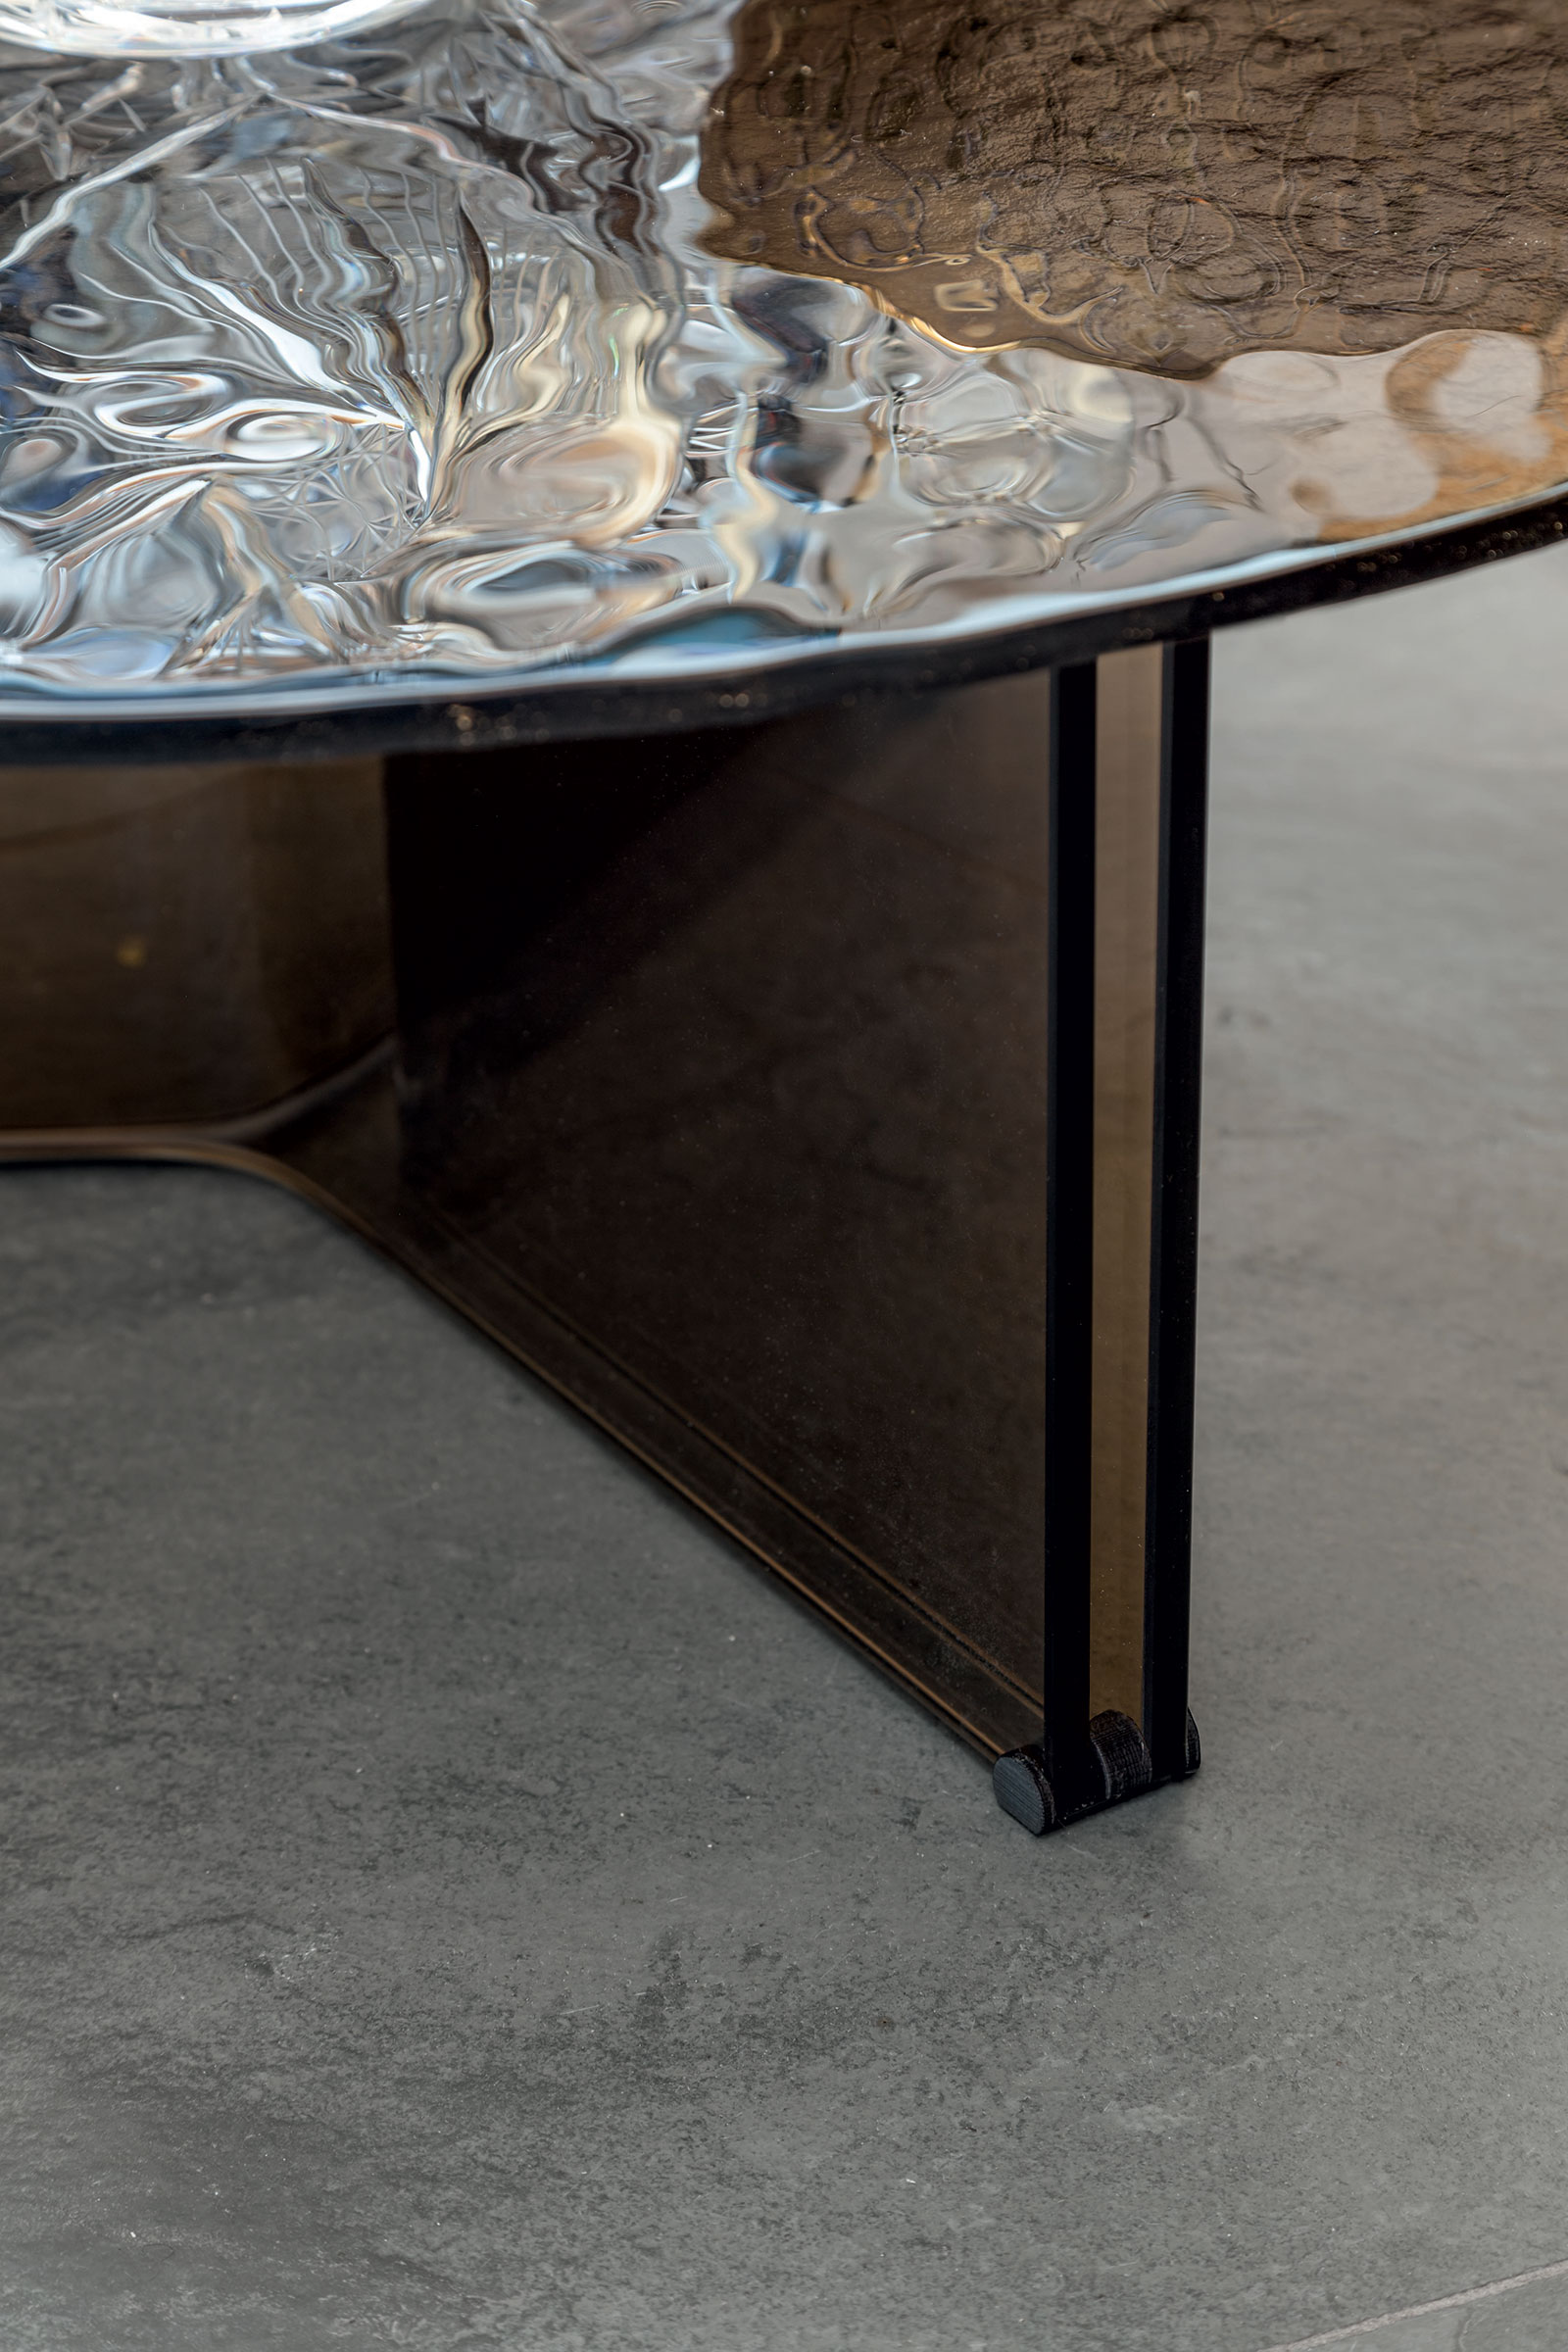 A round coffee table selection, available in several sizes and finishes, completely made of glass. Tops are in bush-hammered glass. Design by "Tosca Design"